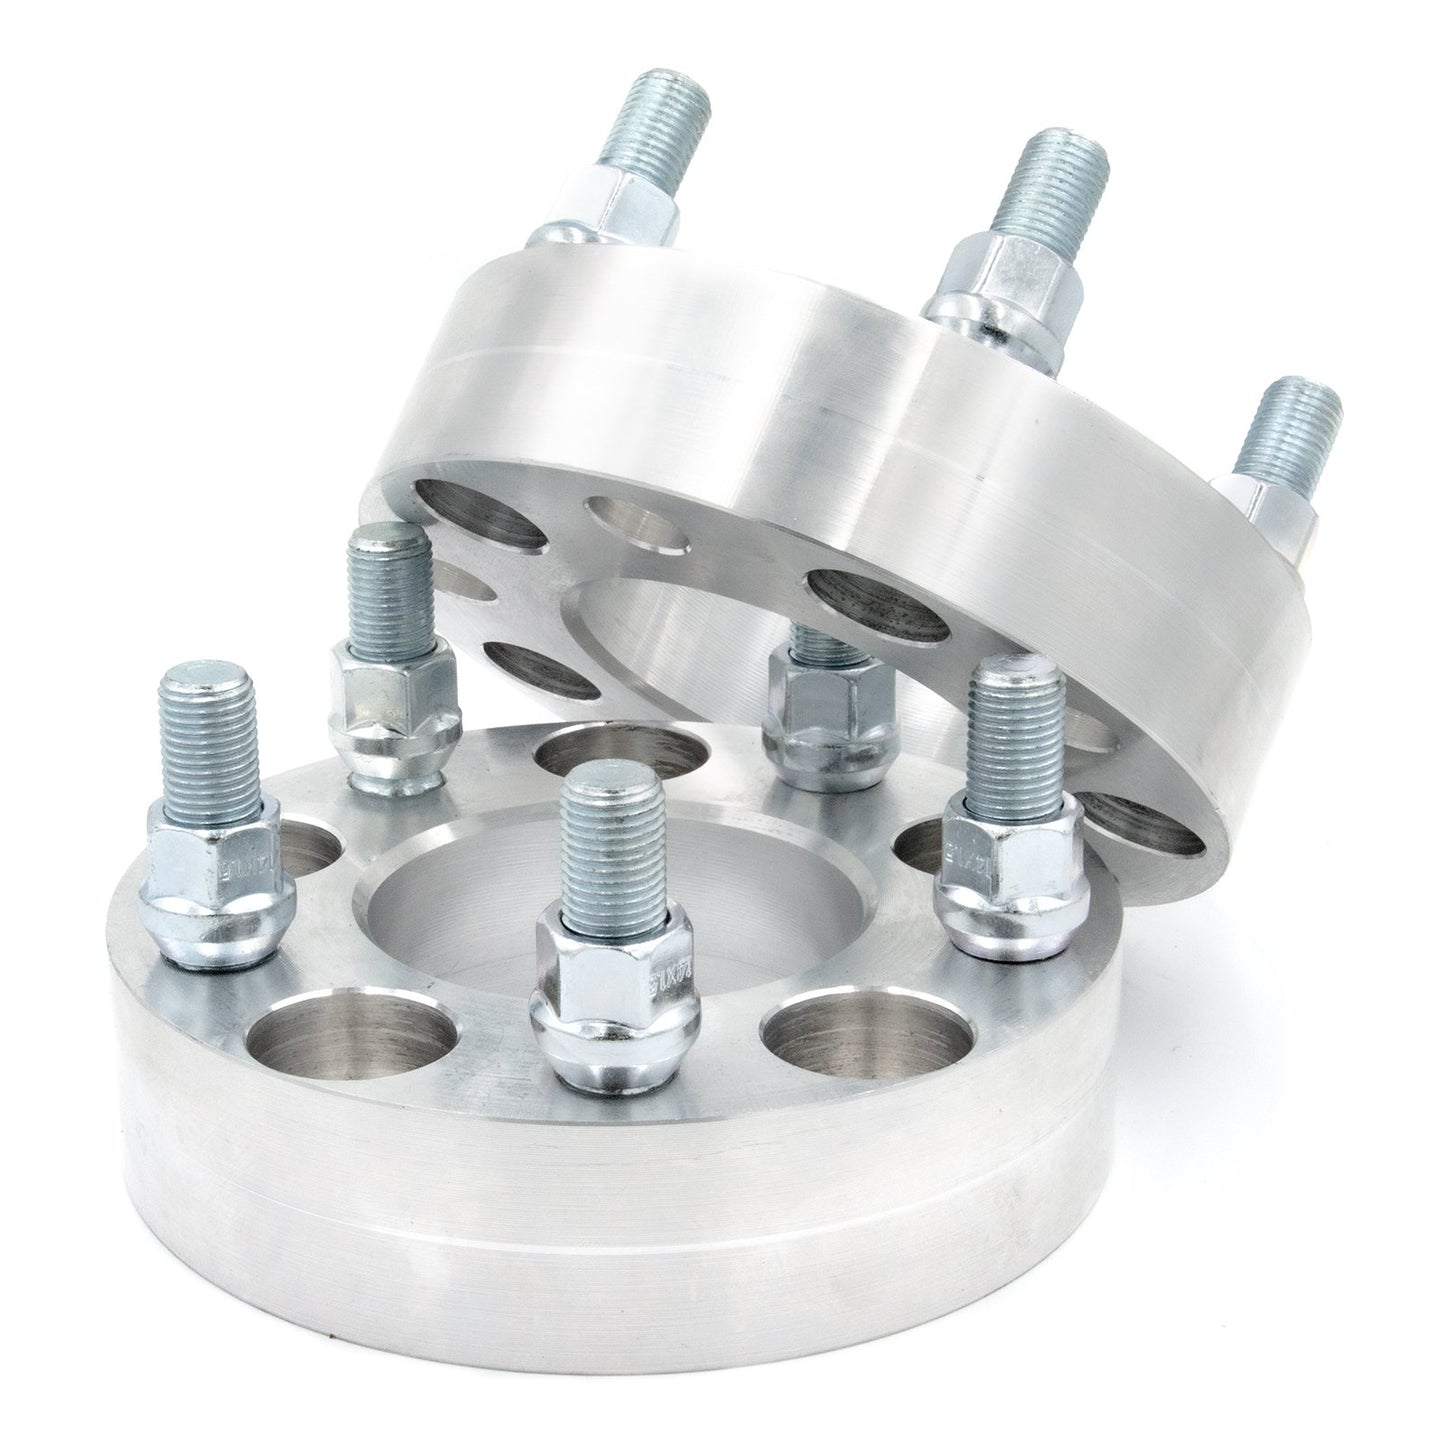 5x5" to 5x5" Wheel Spacer/Adapter - Thickness: 3/4"- 4"